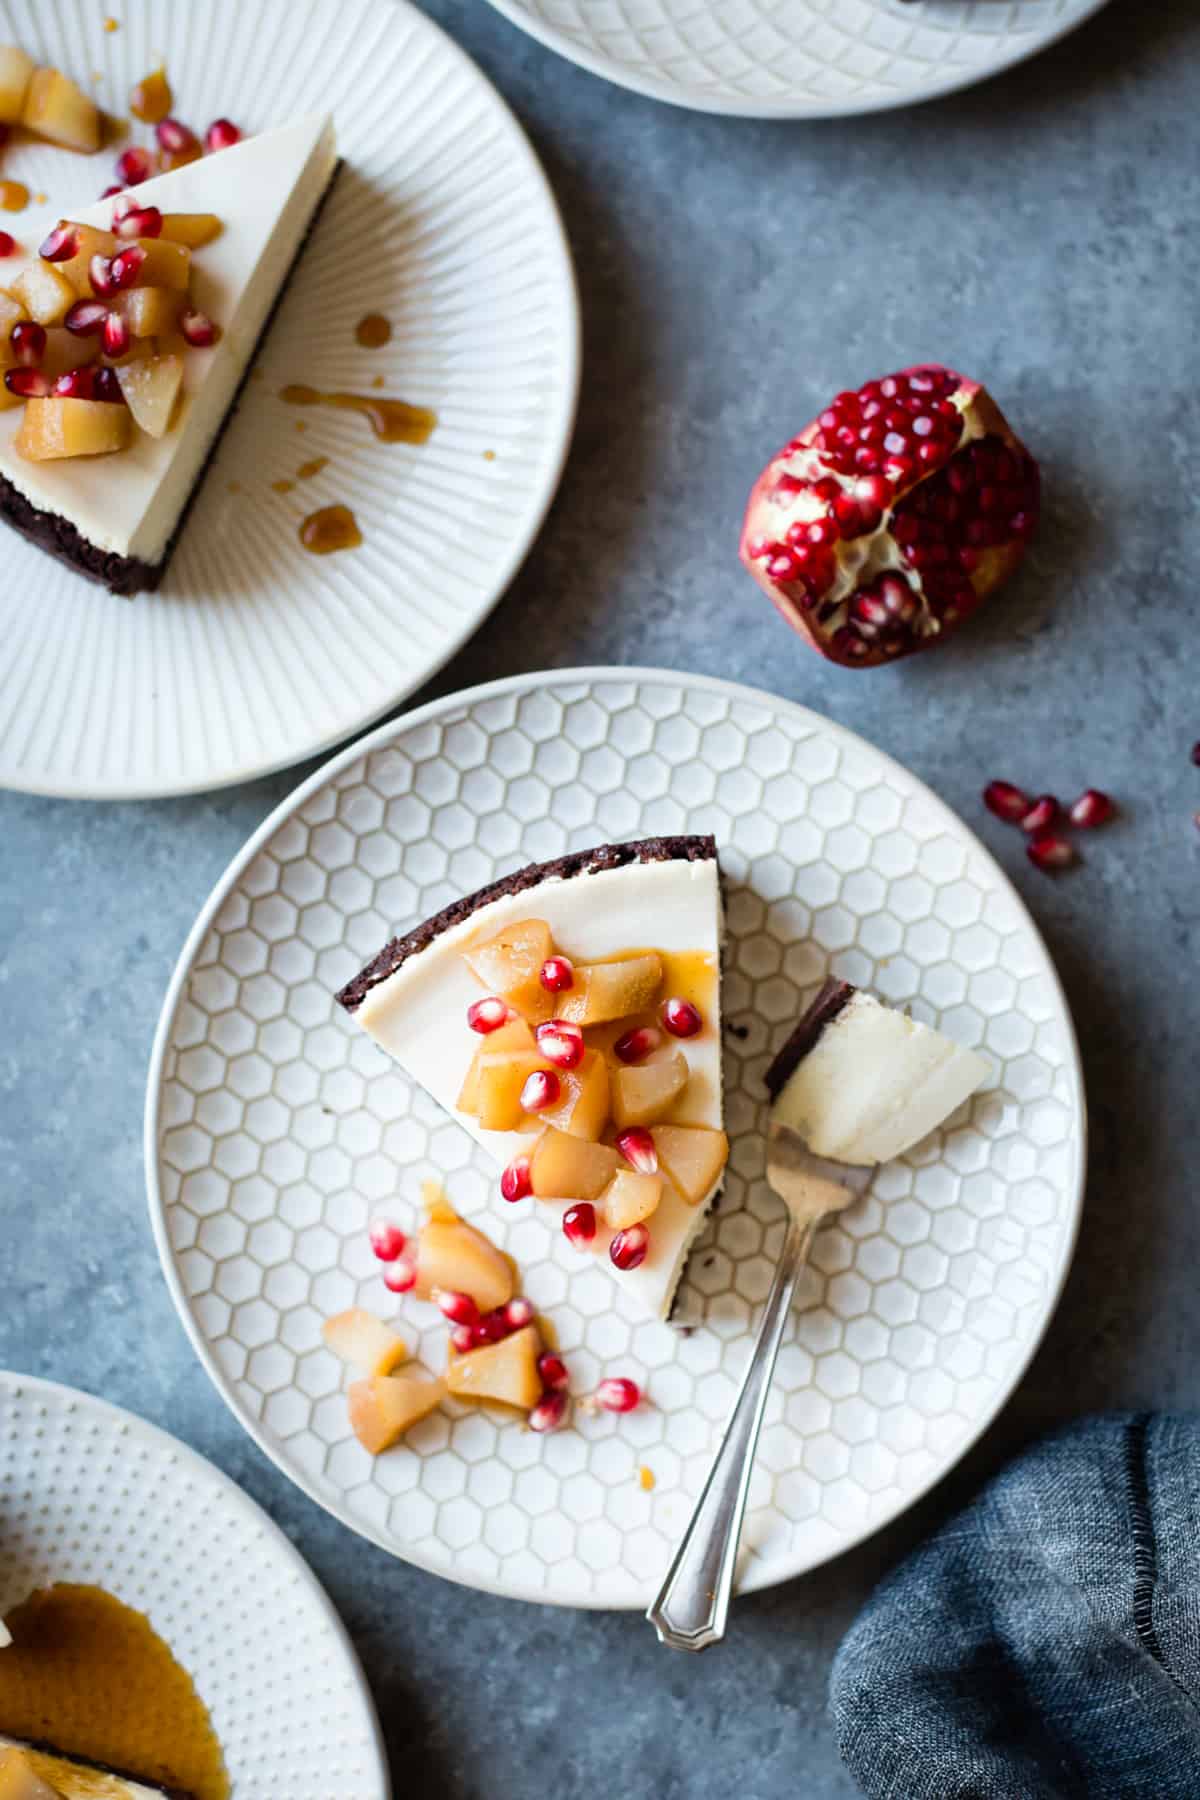 Chocolate Crusted Chèvre Cheesecake with Earl Grey Poached Pears & Pomegranate {gluten-free} on plate 